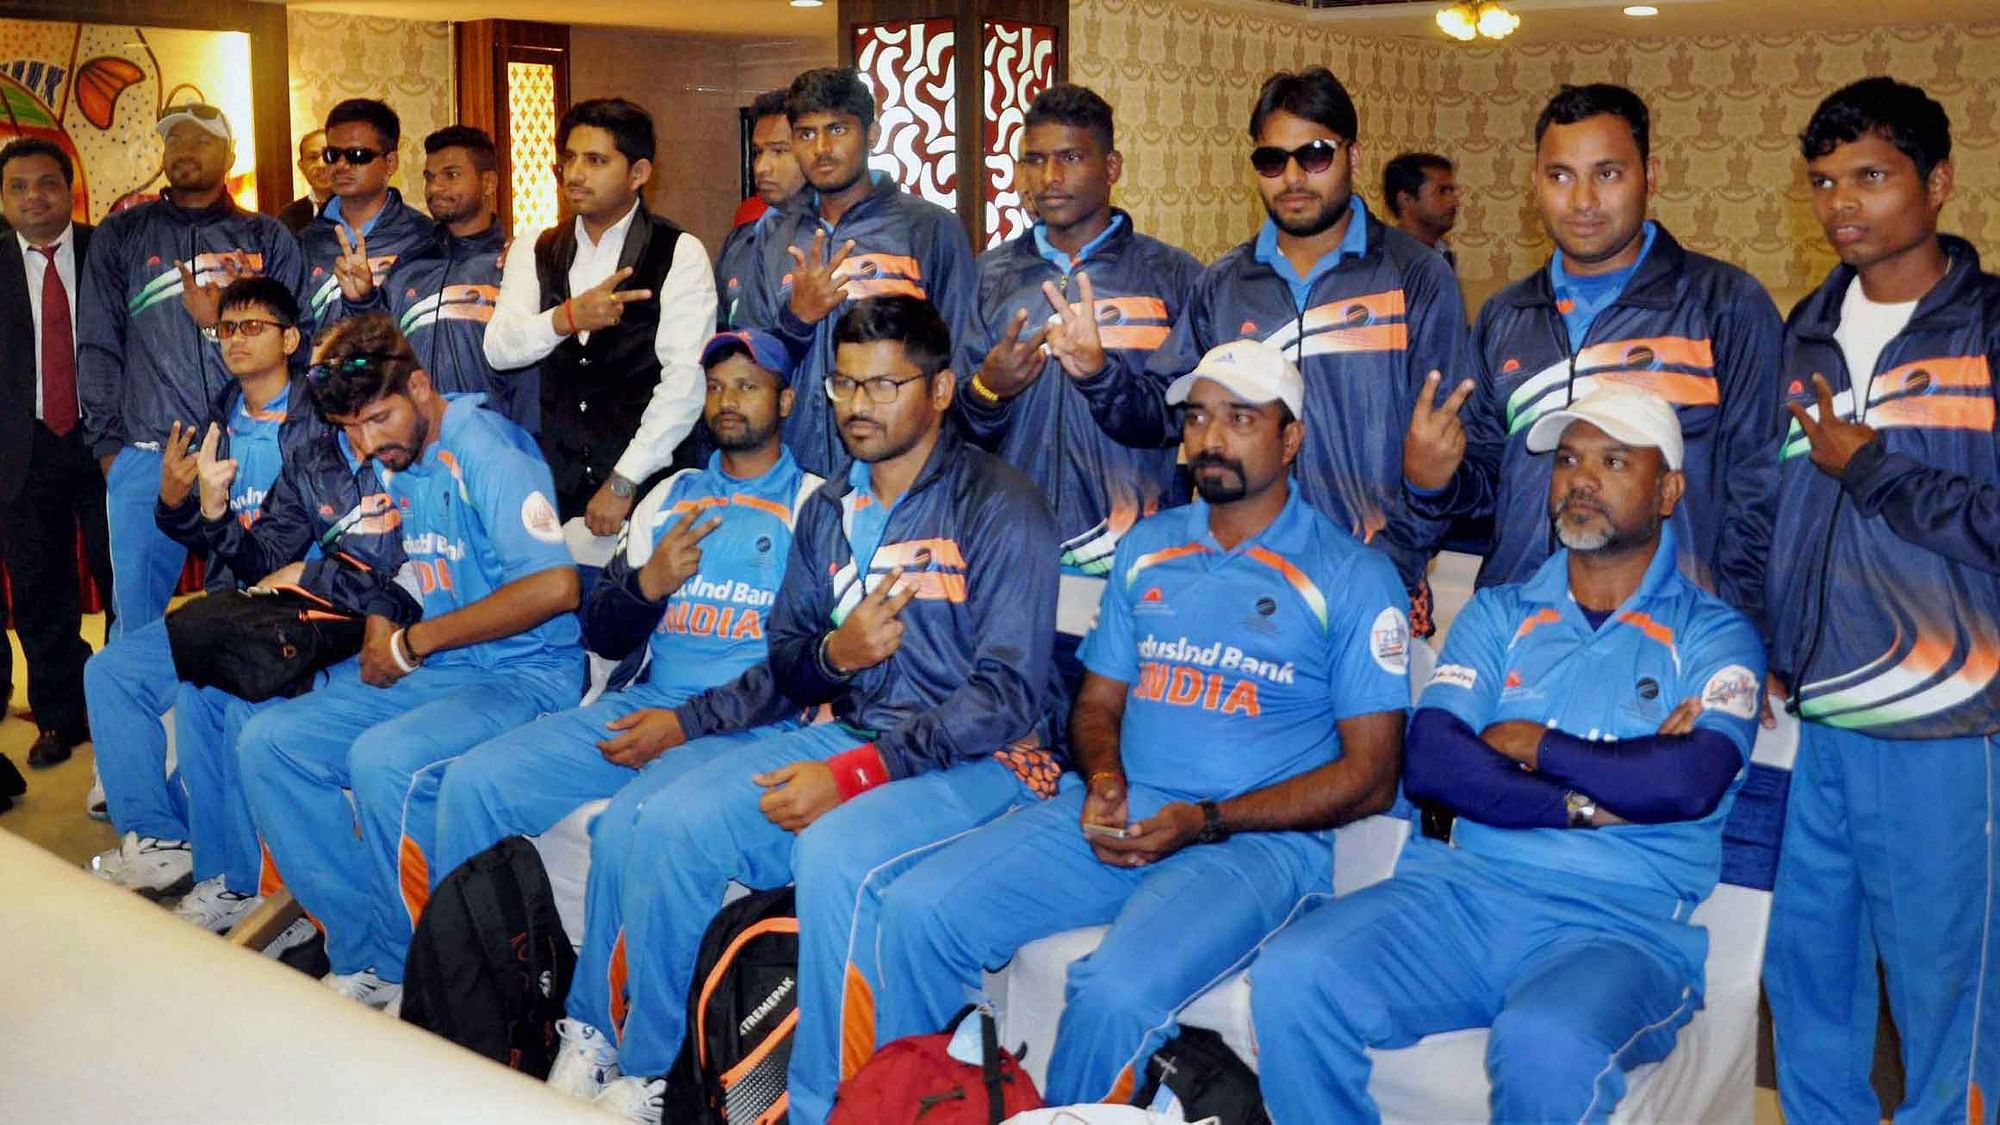 India’s blind cricket team are so far unbeaten in the ongoing World Cup.